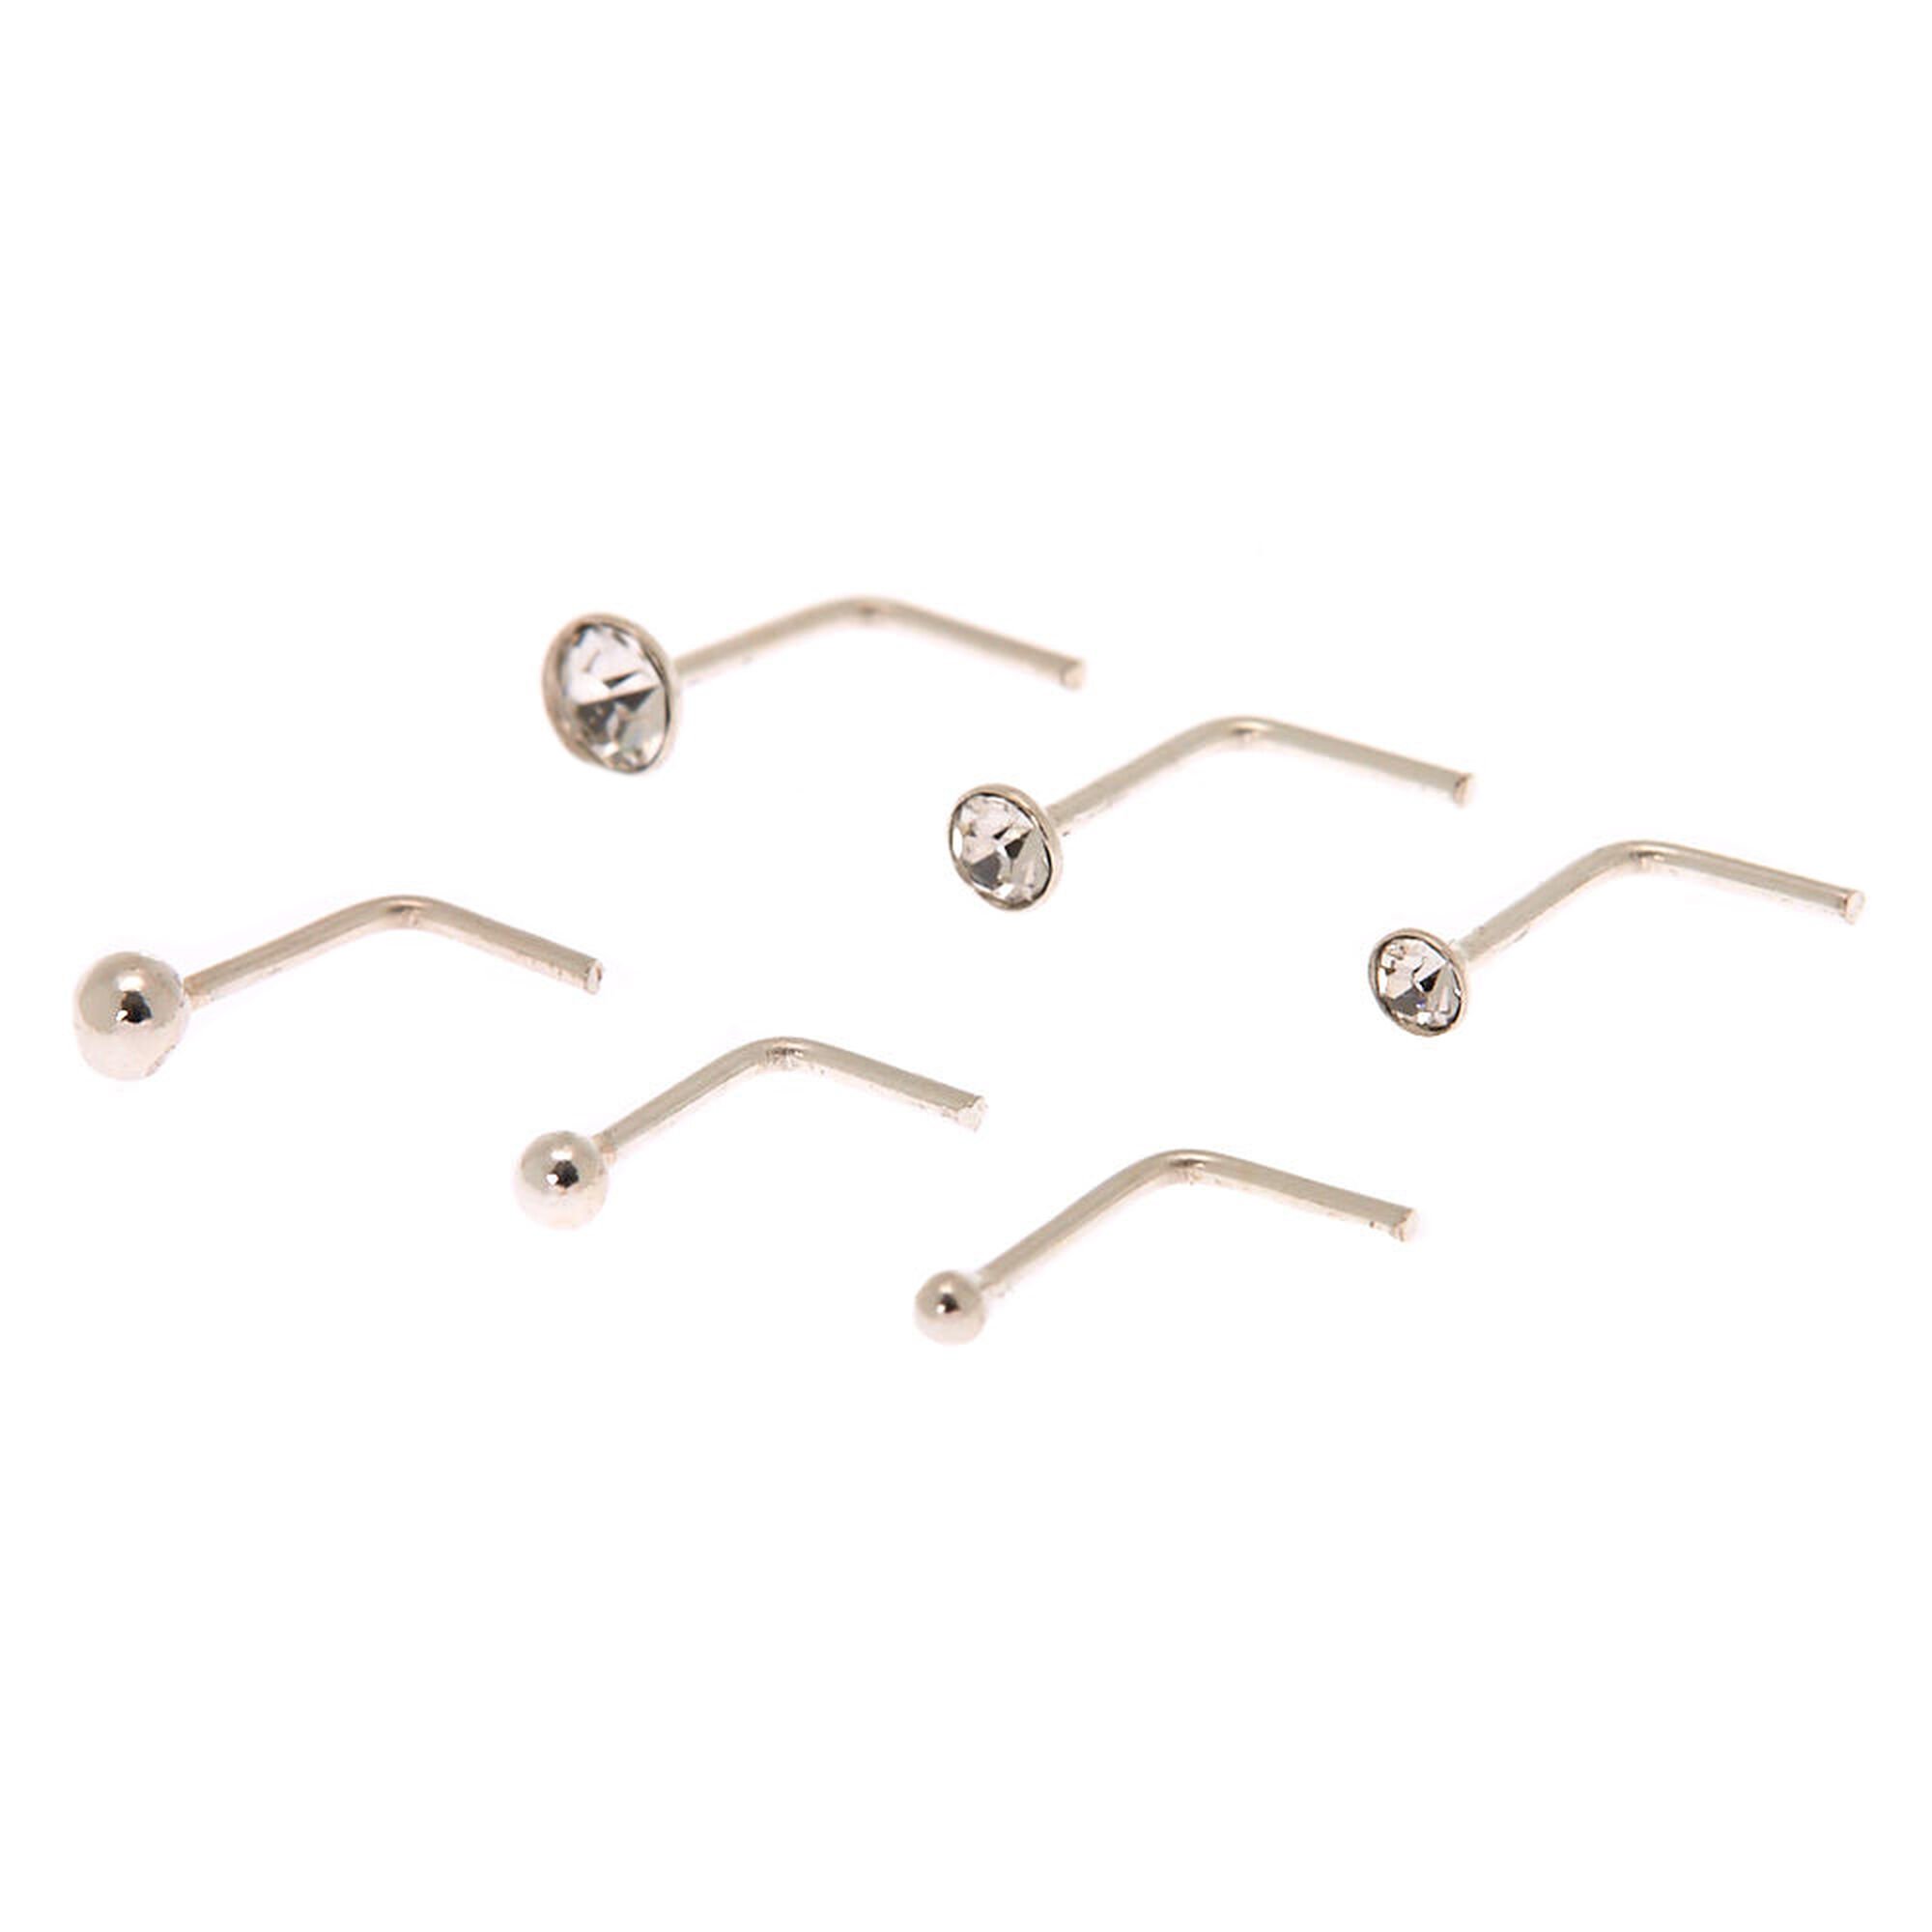 View Claires 22G Graduated Nose Studs 6 Pack Silver information